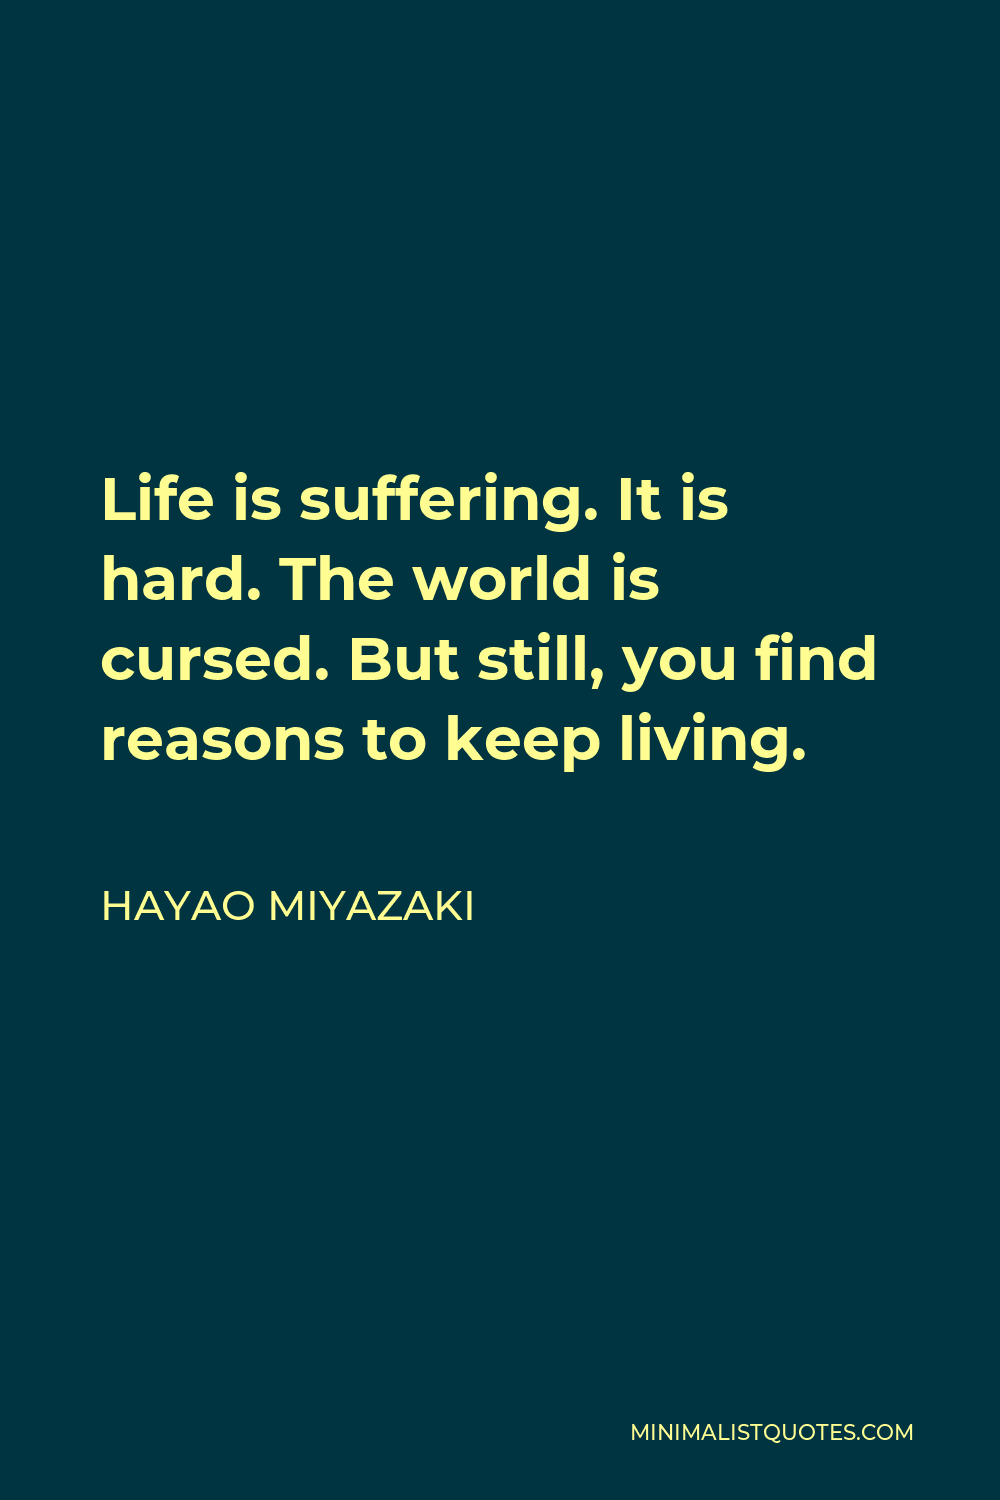 Hayao Miyazaki Quote - Life is suffering. It is hard. The world is cursed. But still, you find reasons to keep living.